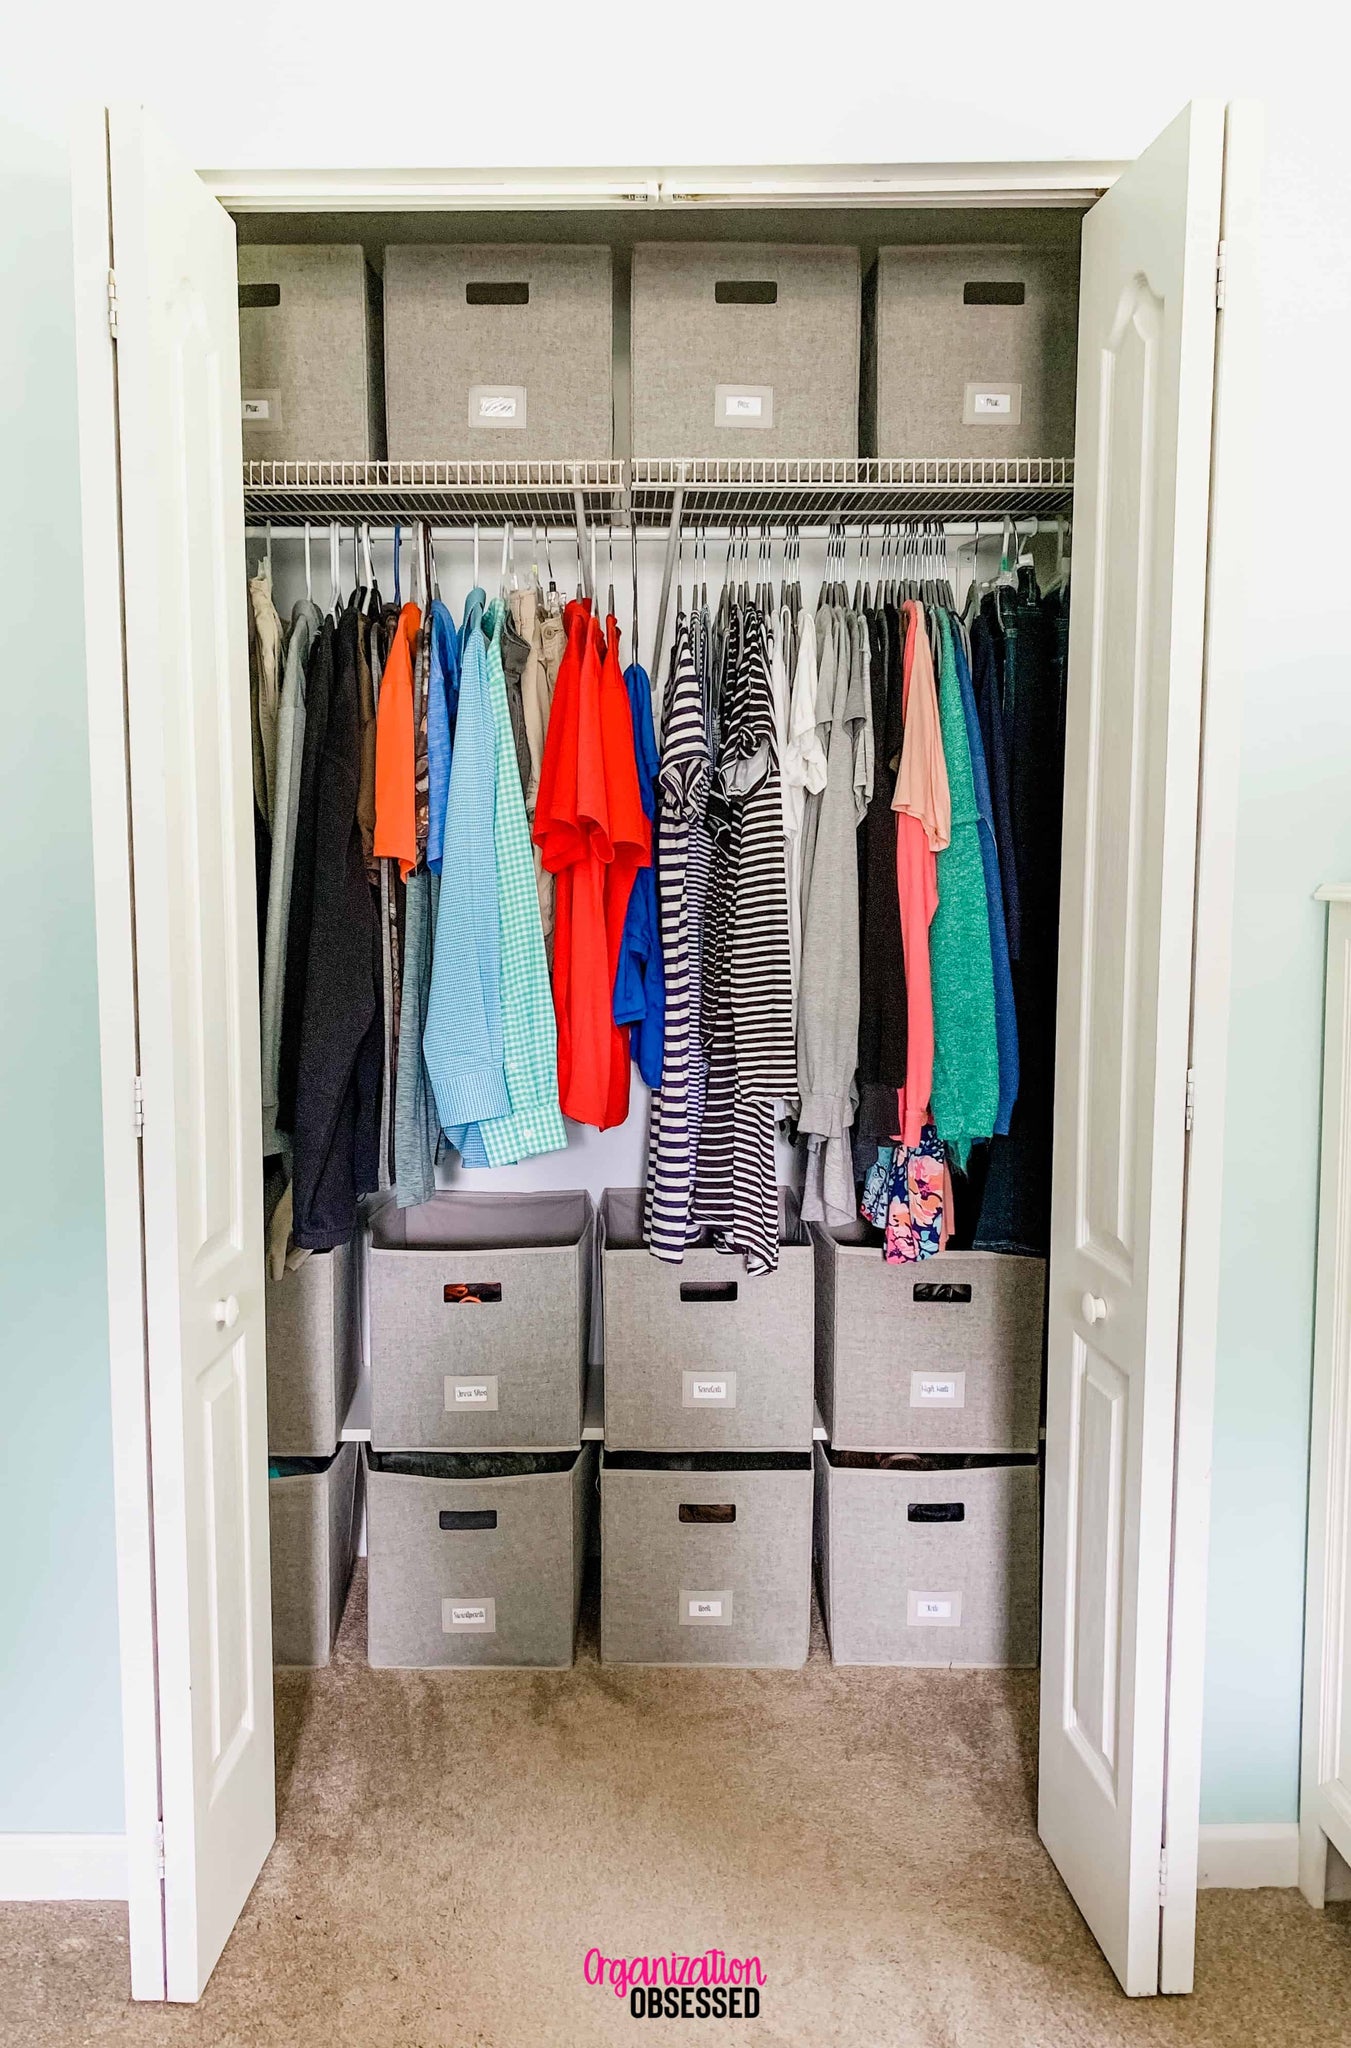 Organizing our small bedroom closet has always been one of my least favorite chores in our home